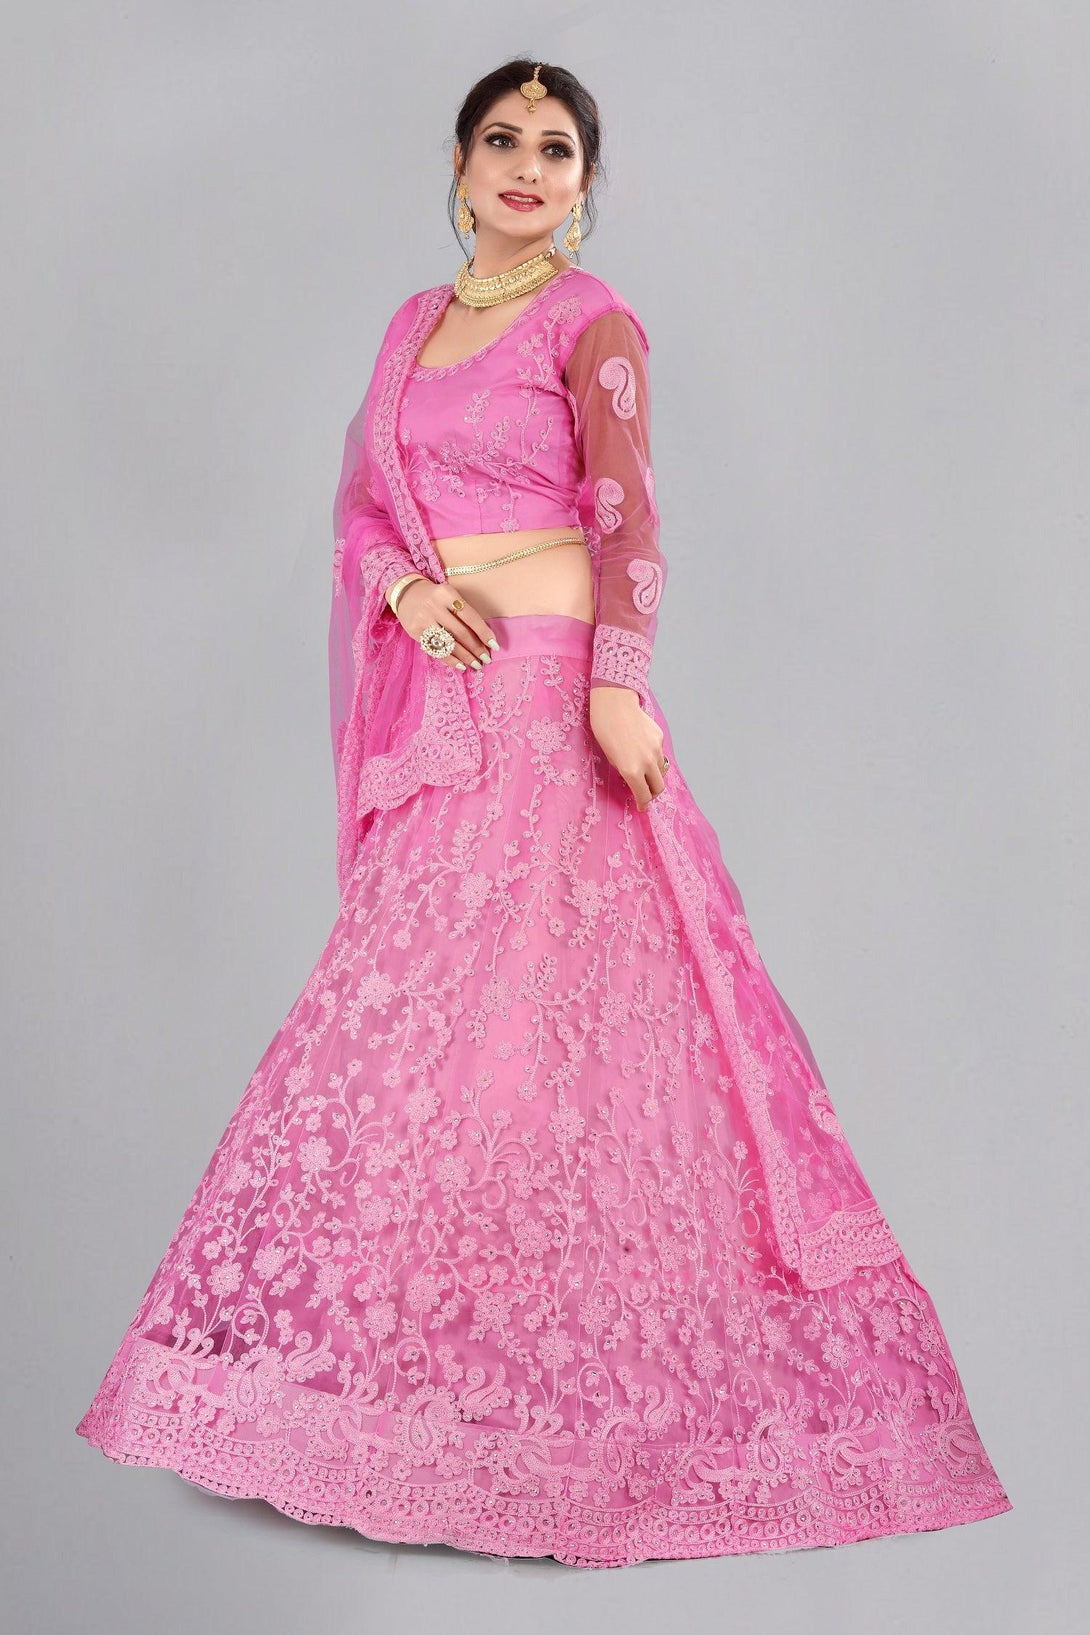 Baby Pink Net Lehenga Choli with Floral Embroidery - Indiakreations